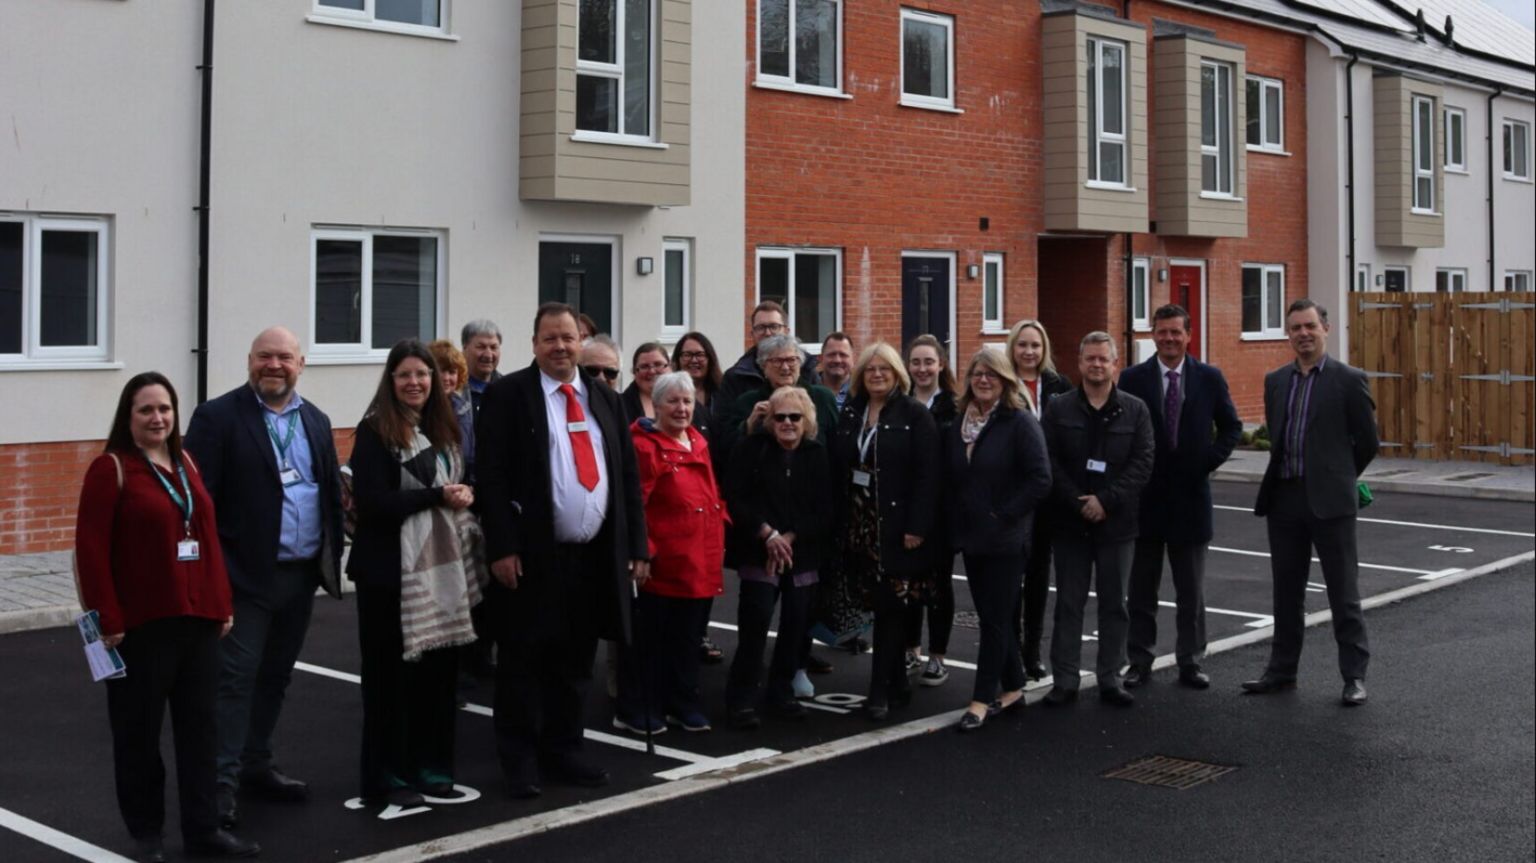 Bill Revans standing with a group of people outside new homes